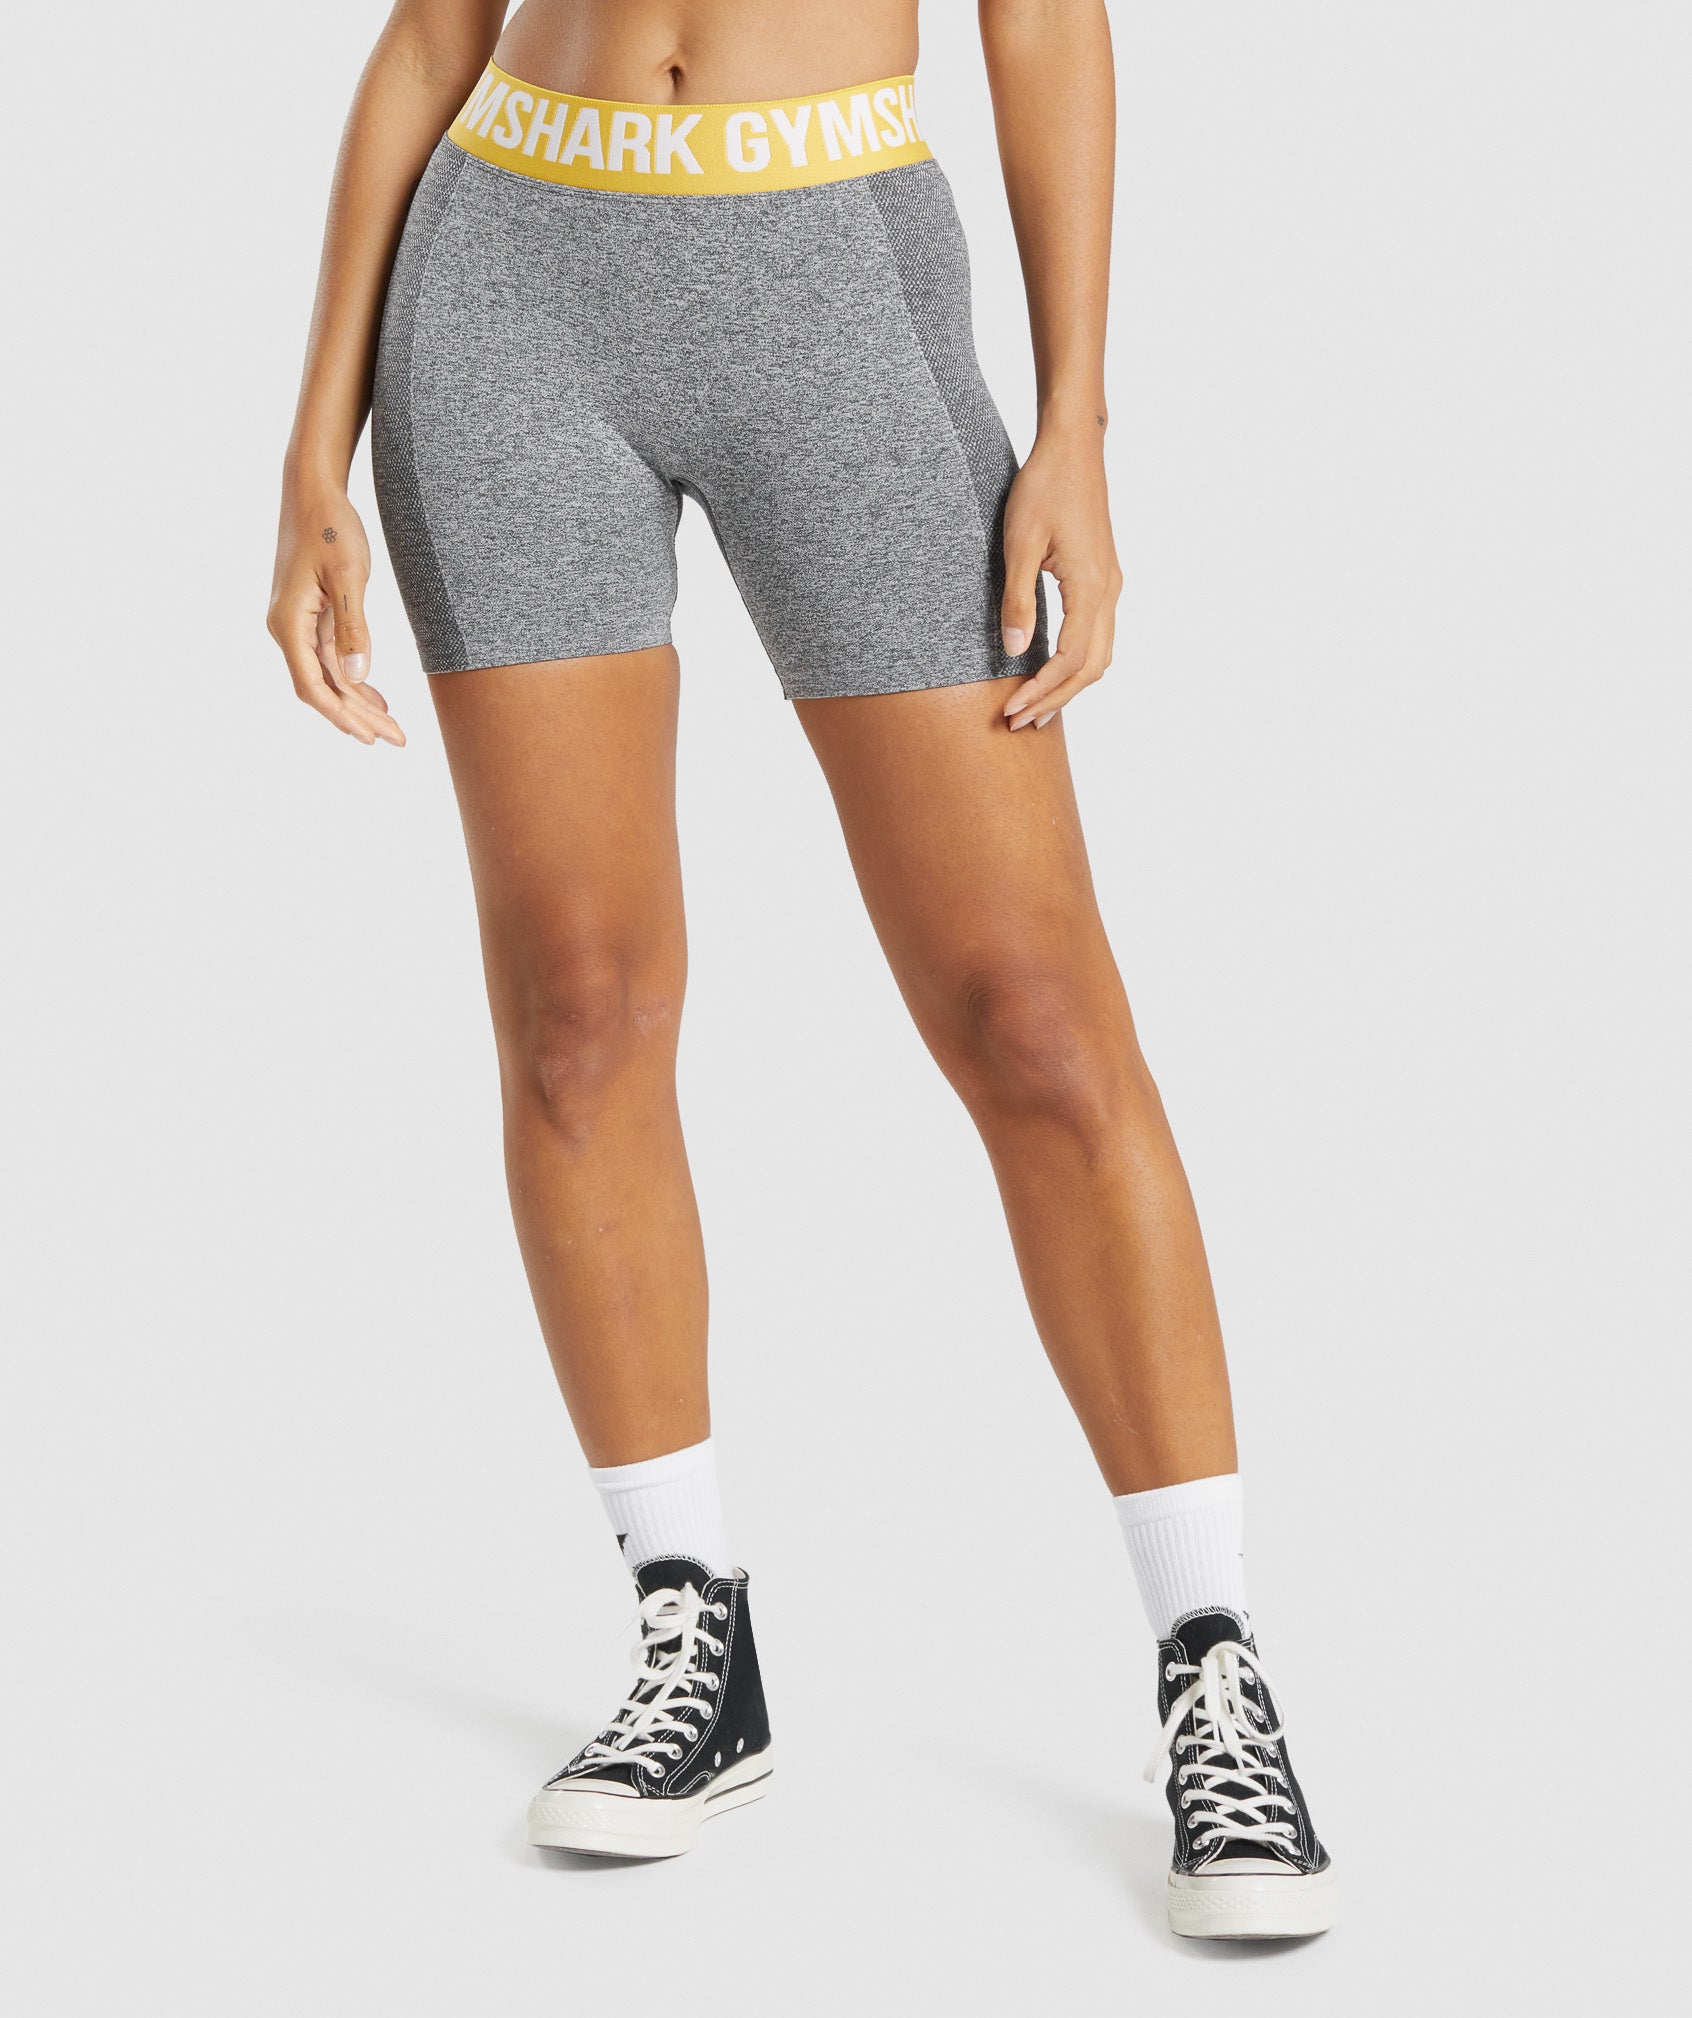 Flex Shorts in Charcoal Marl - view 1